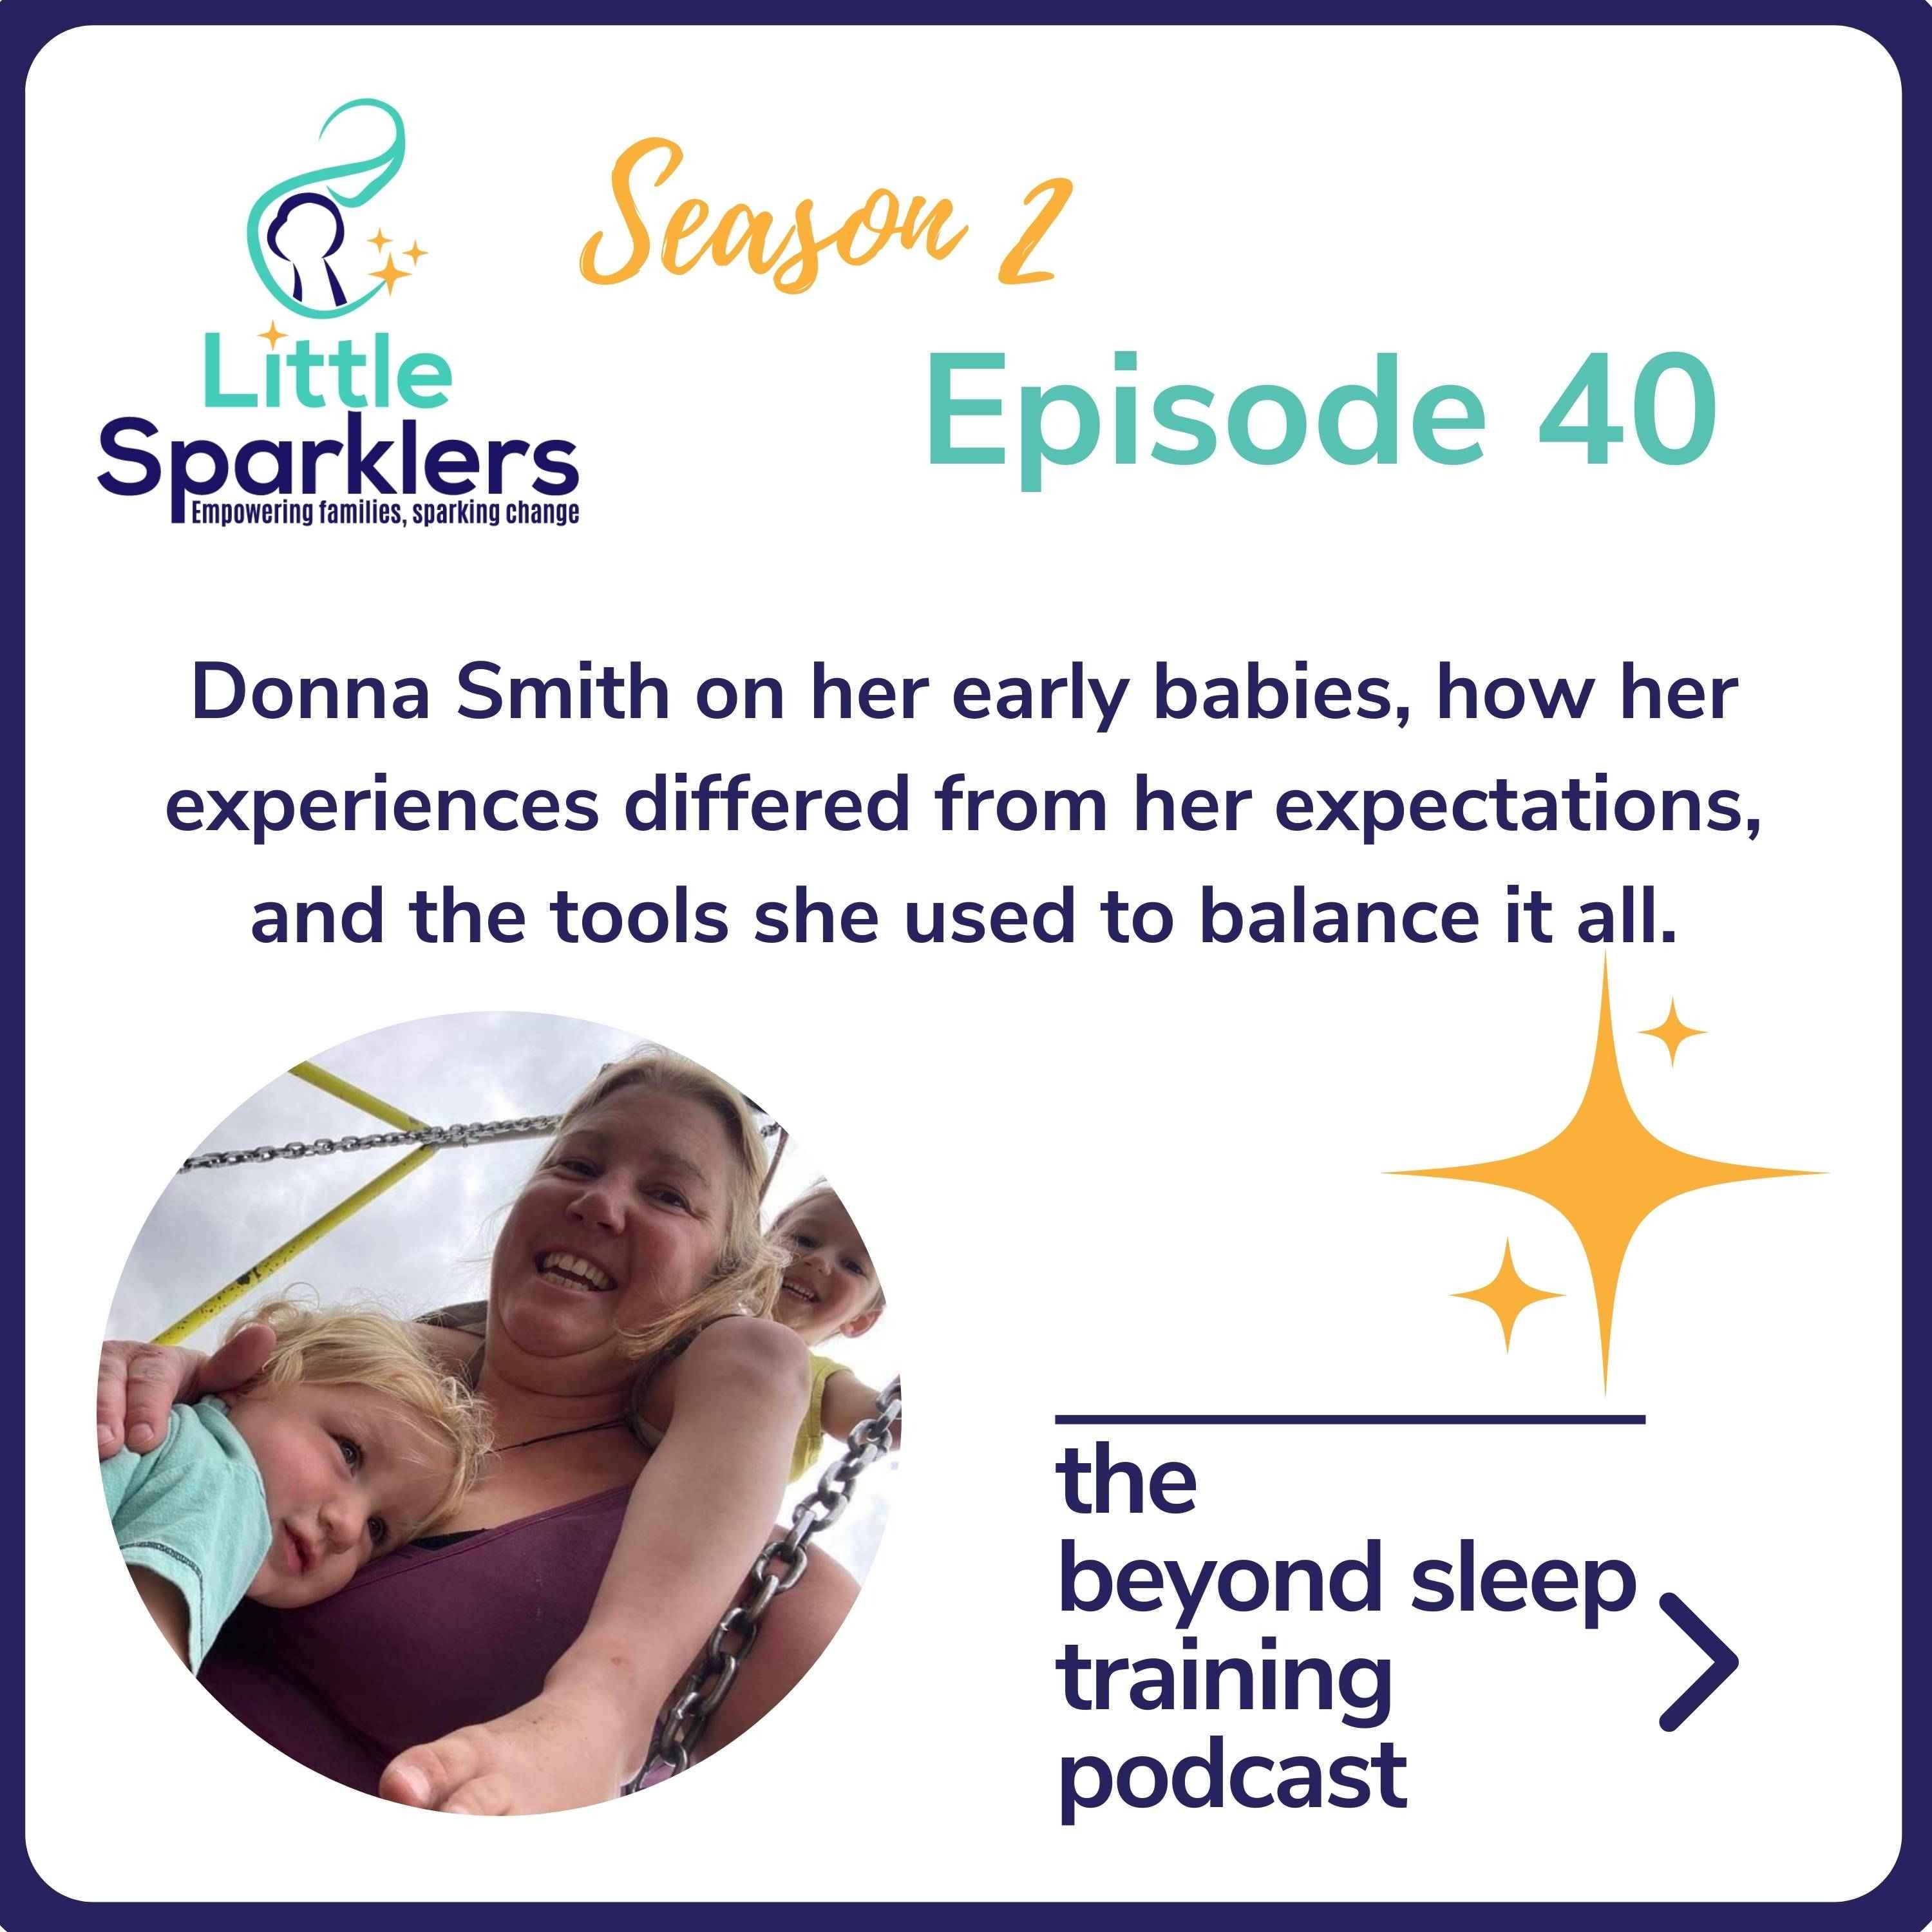 Donna Smith on her early babies, how her experiences differed from her expectations, and the tools she used to balance it all.